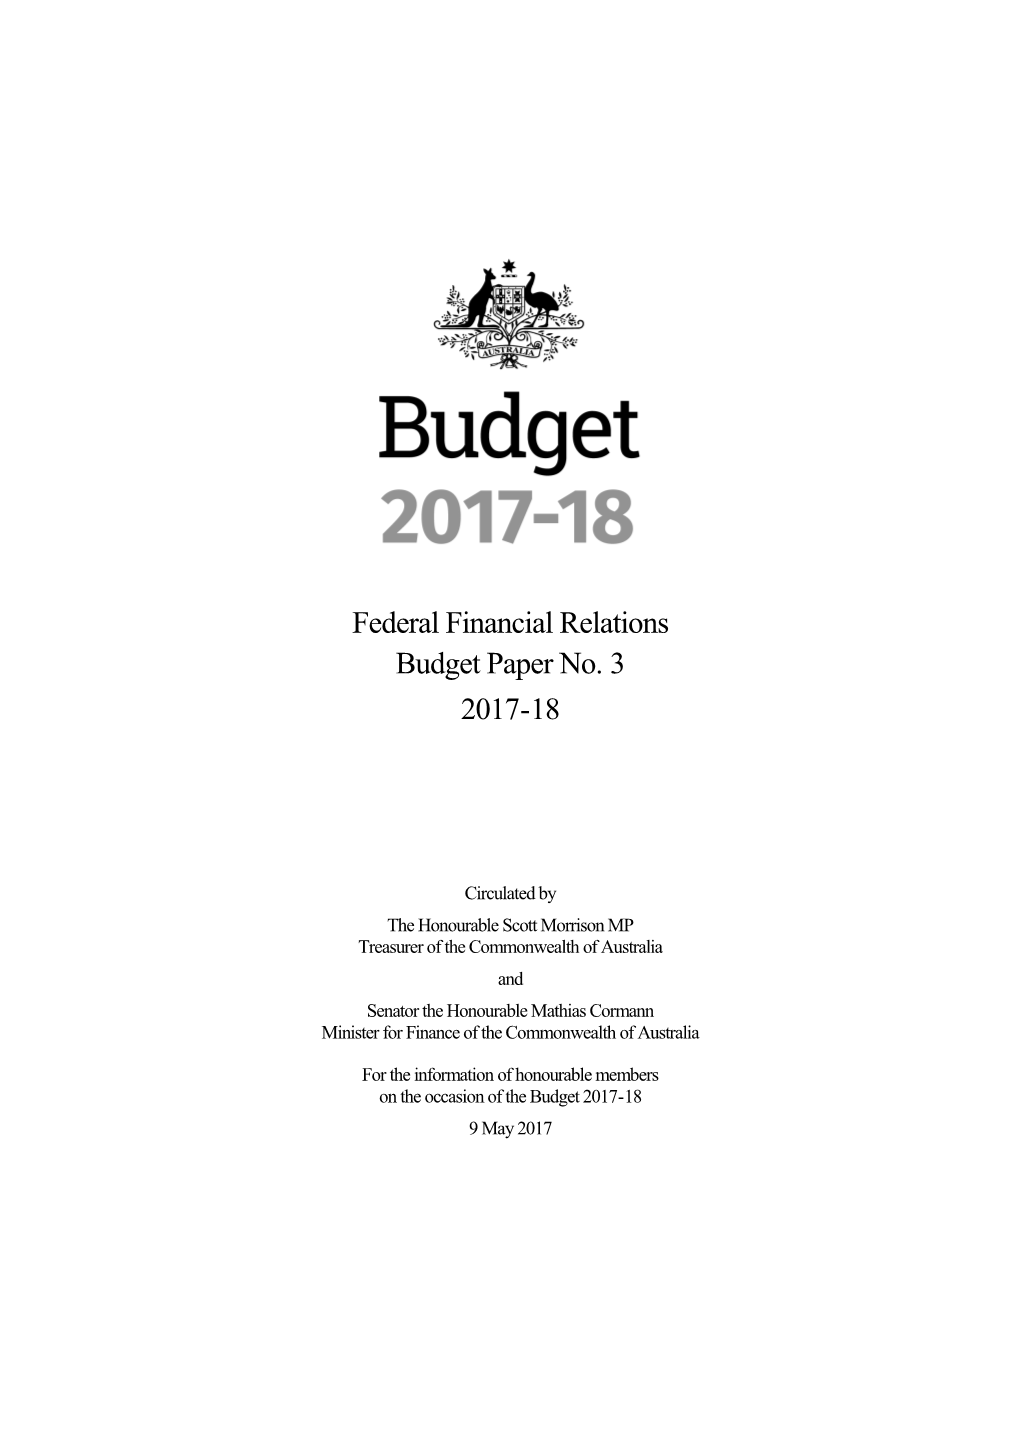 Budget Paper No. 3: Federal Financial Relations 2017- 18 - Preliminaries and Foreword